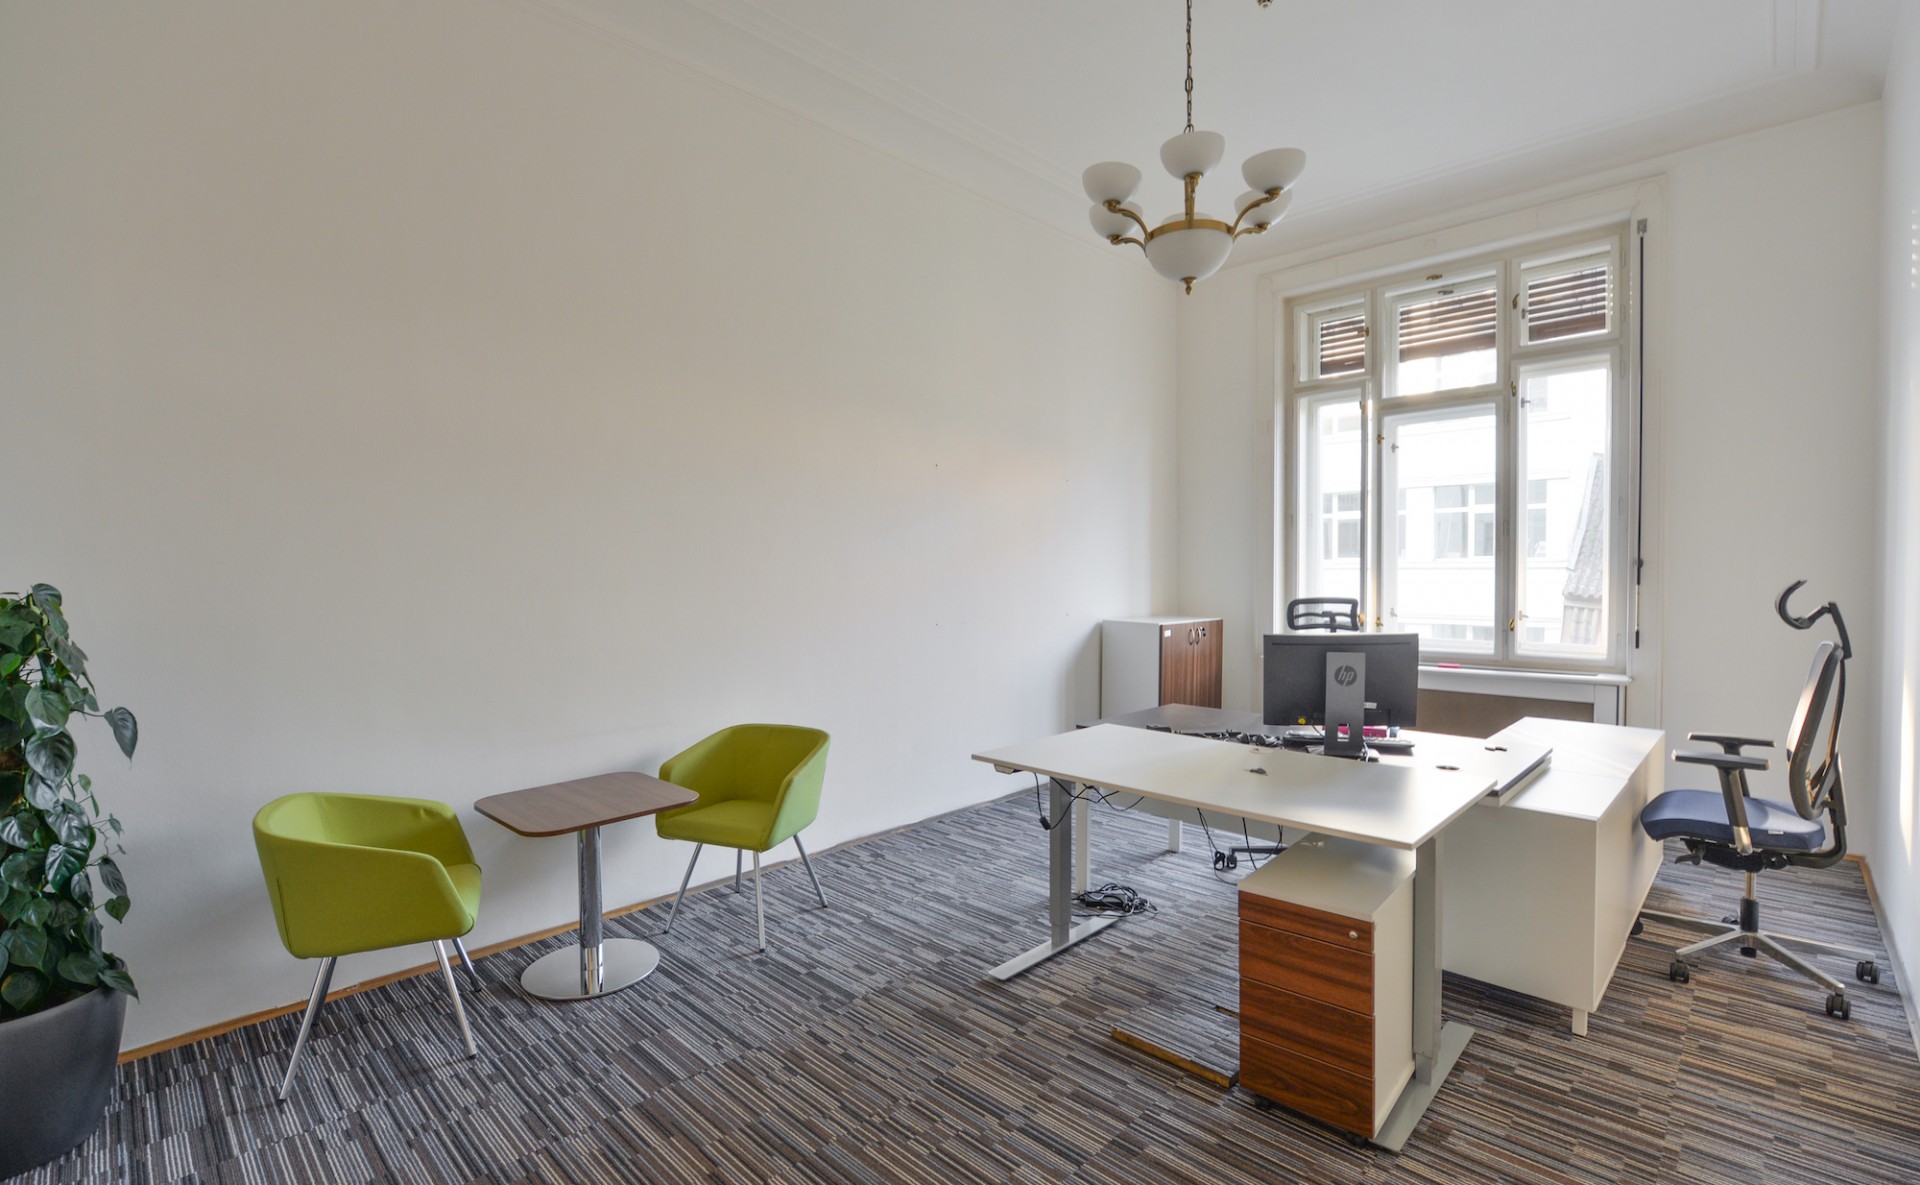 Offices for rent Prague 1